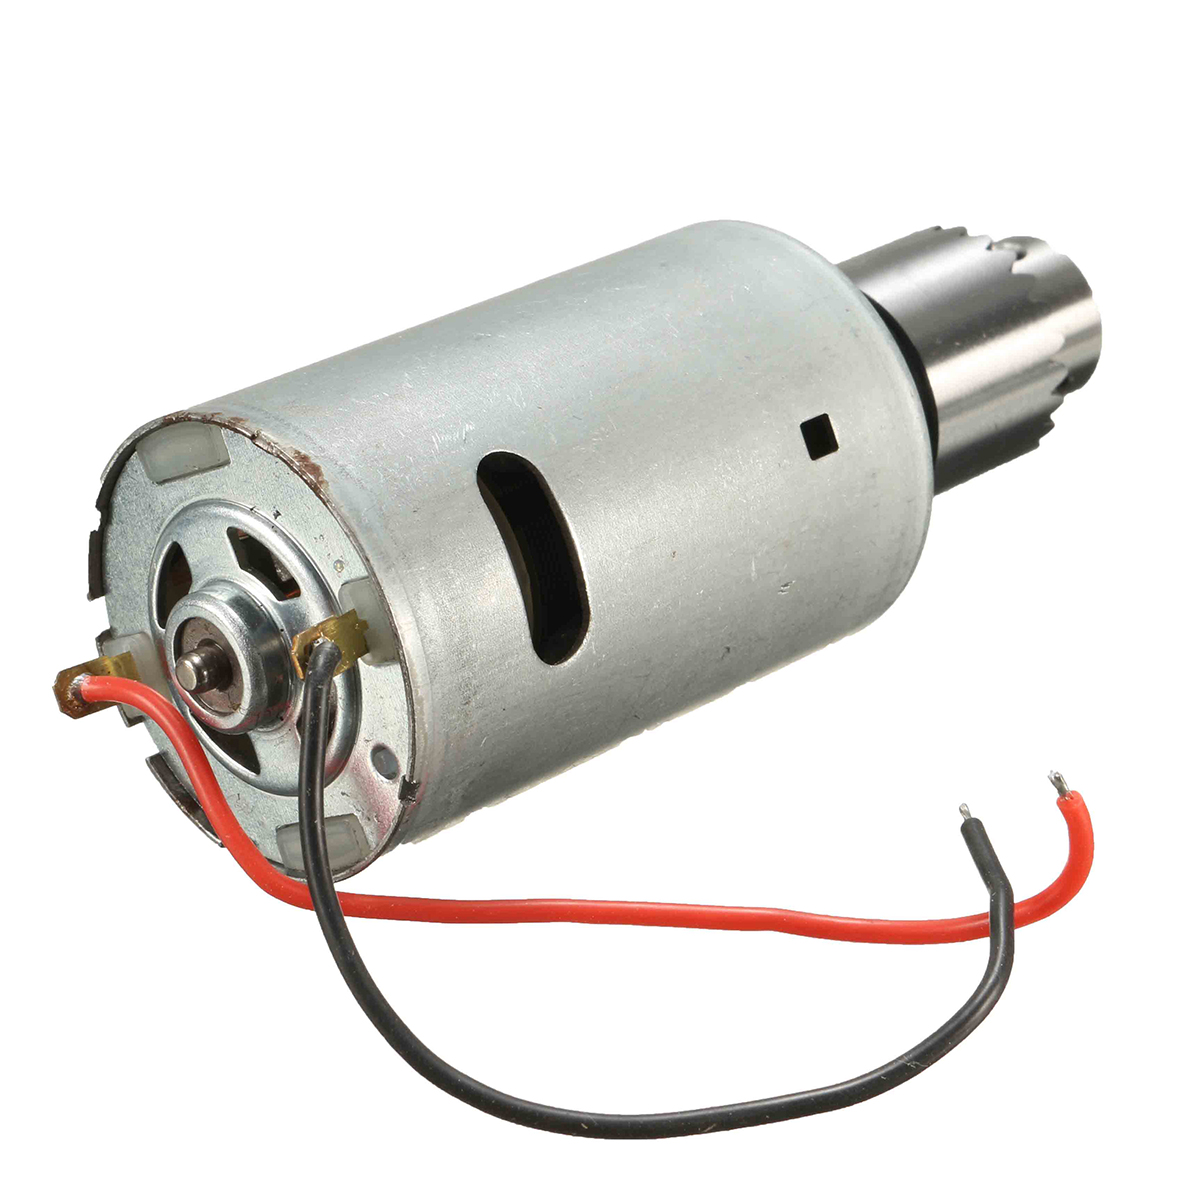 DC-12V-24V-555-Motor-For-DIY-Electric-Hand-Drill-With-JT0-Chuck-1117553-5